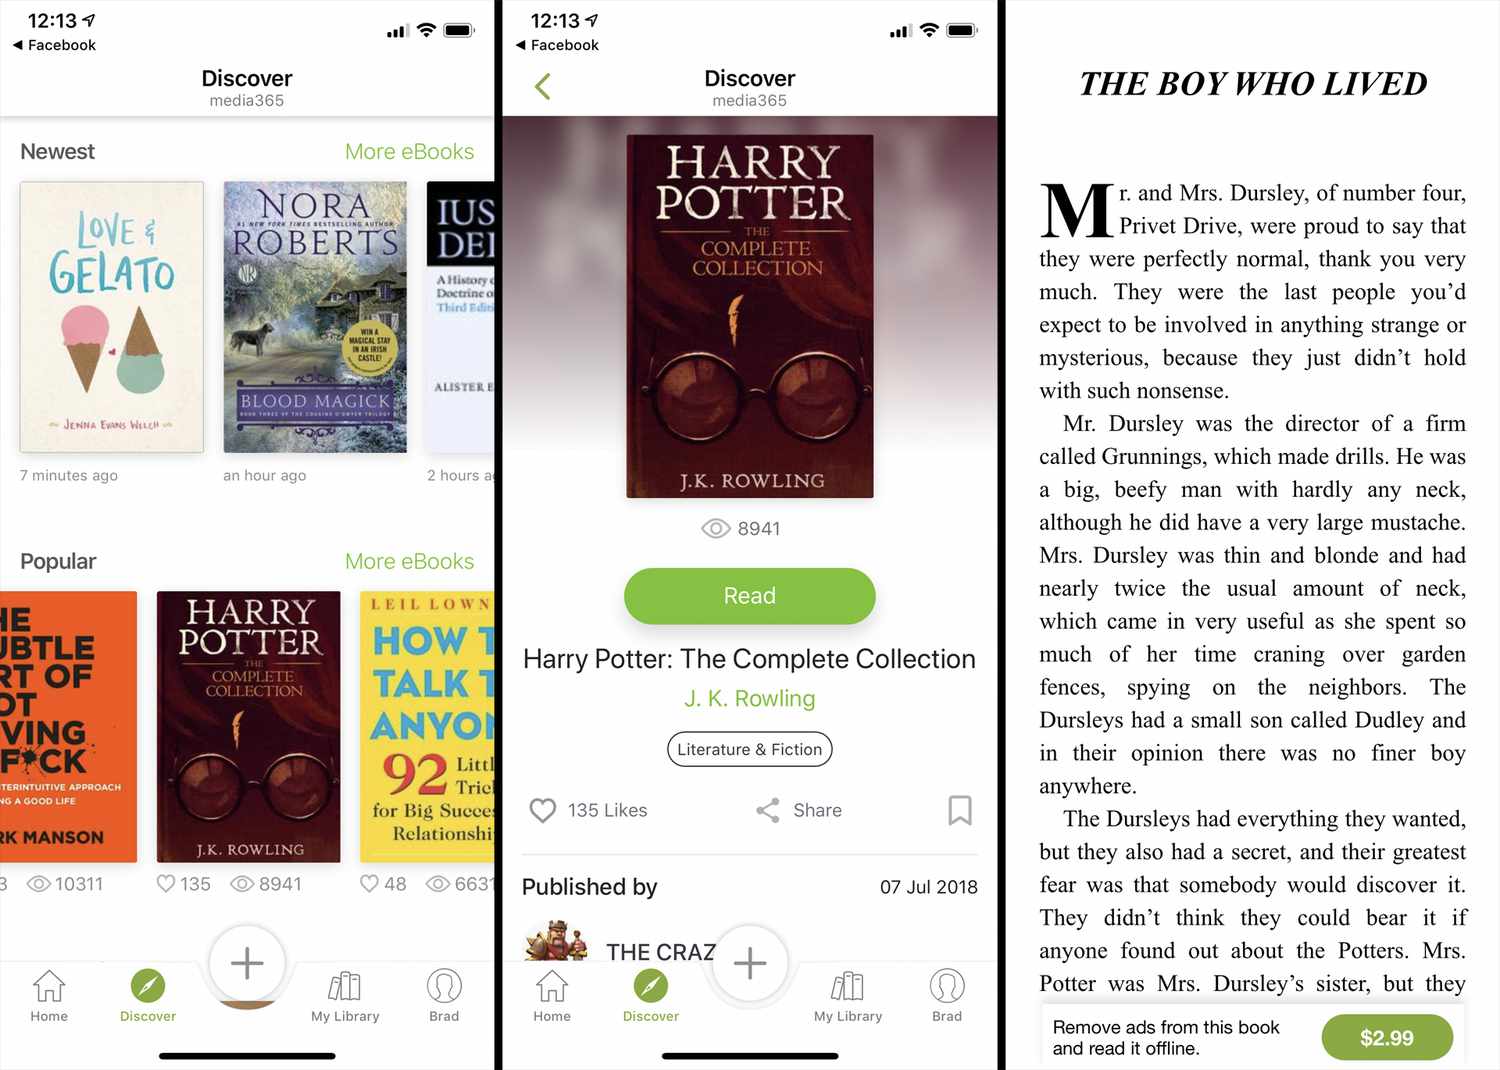 Can I read the Harry Potter books on my Android device with the ReadEra app? 2